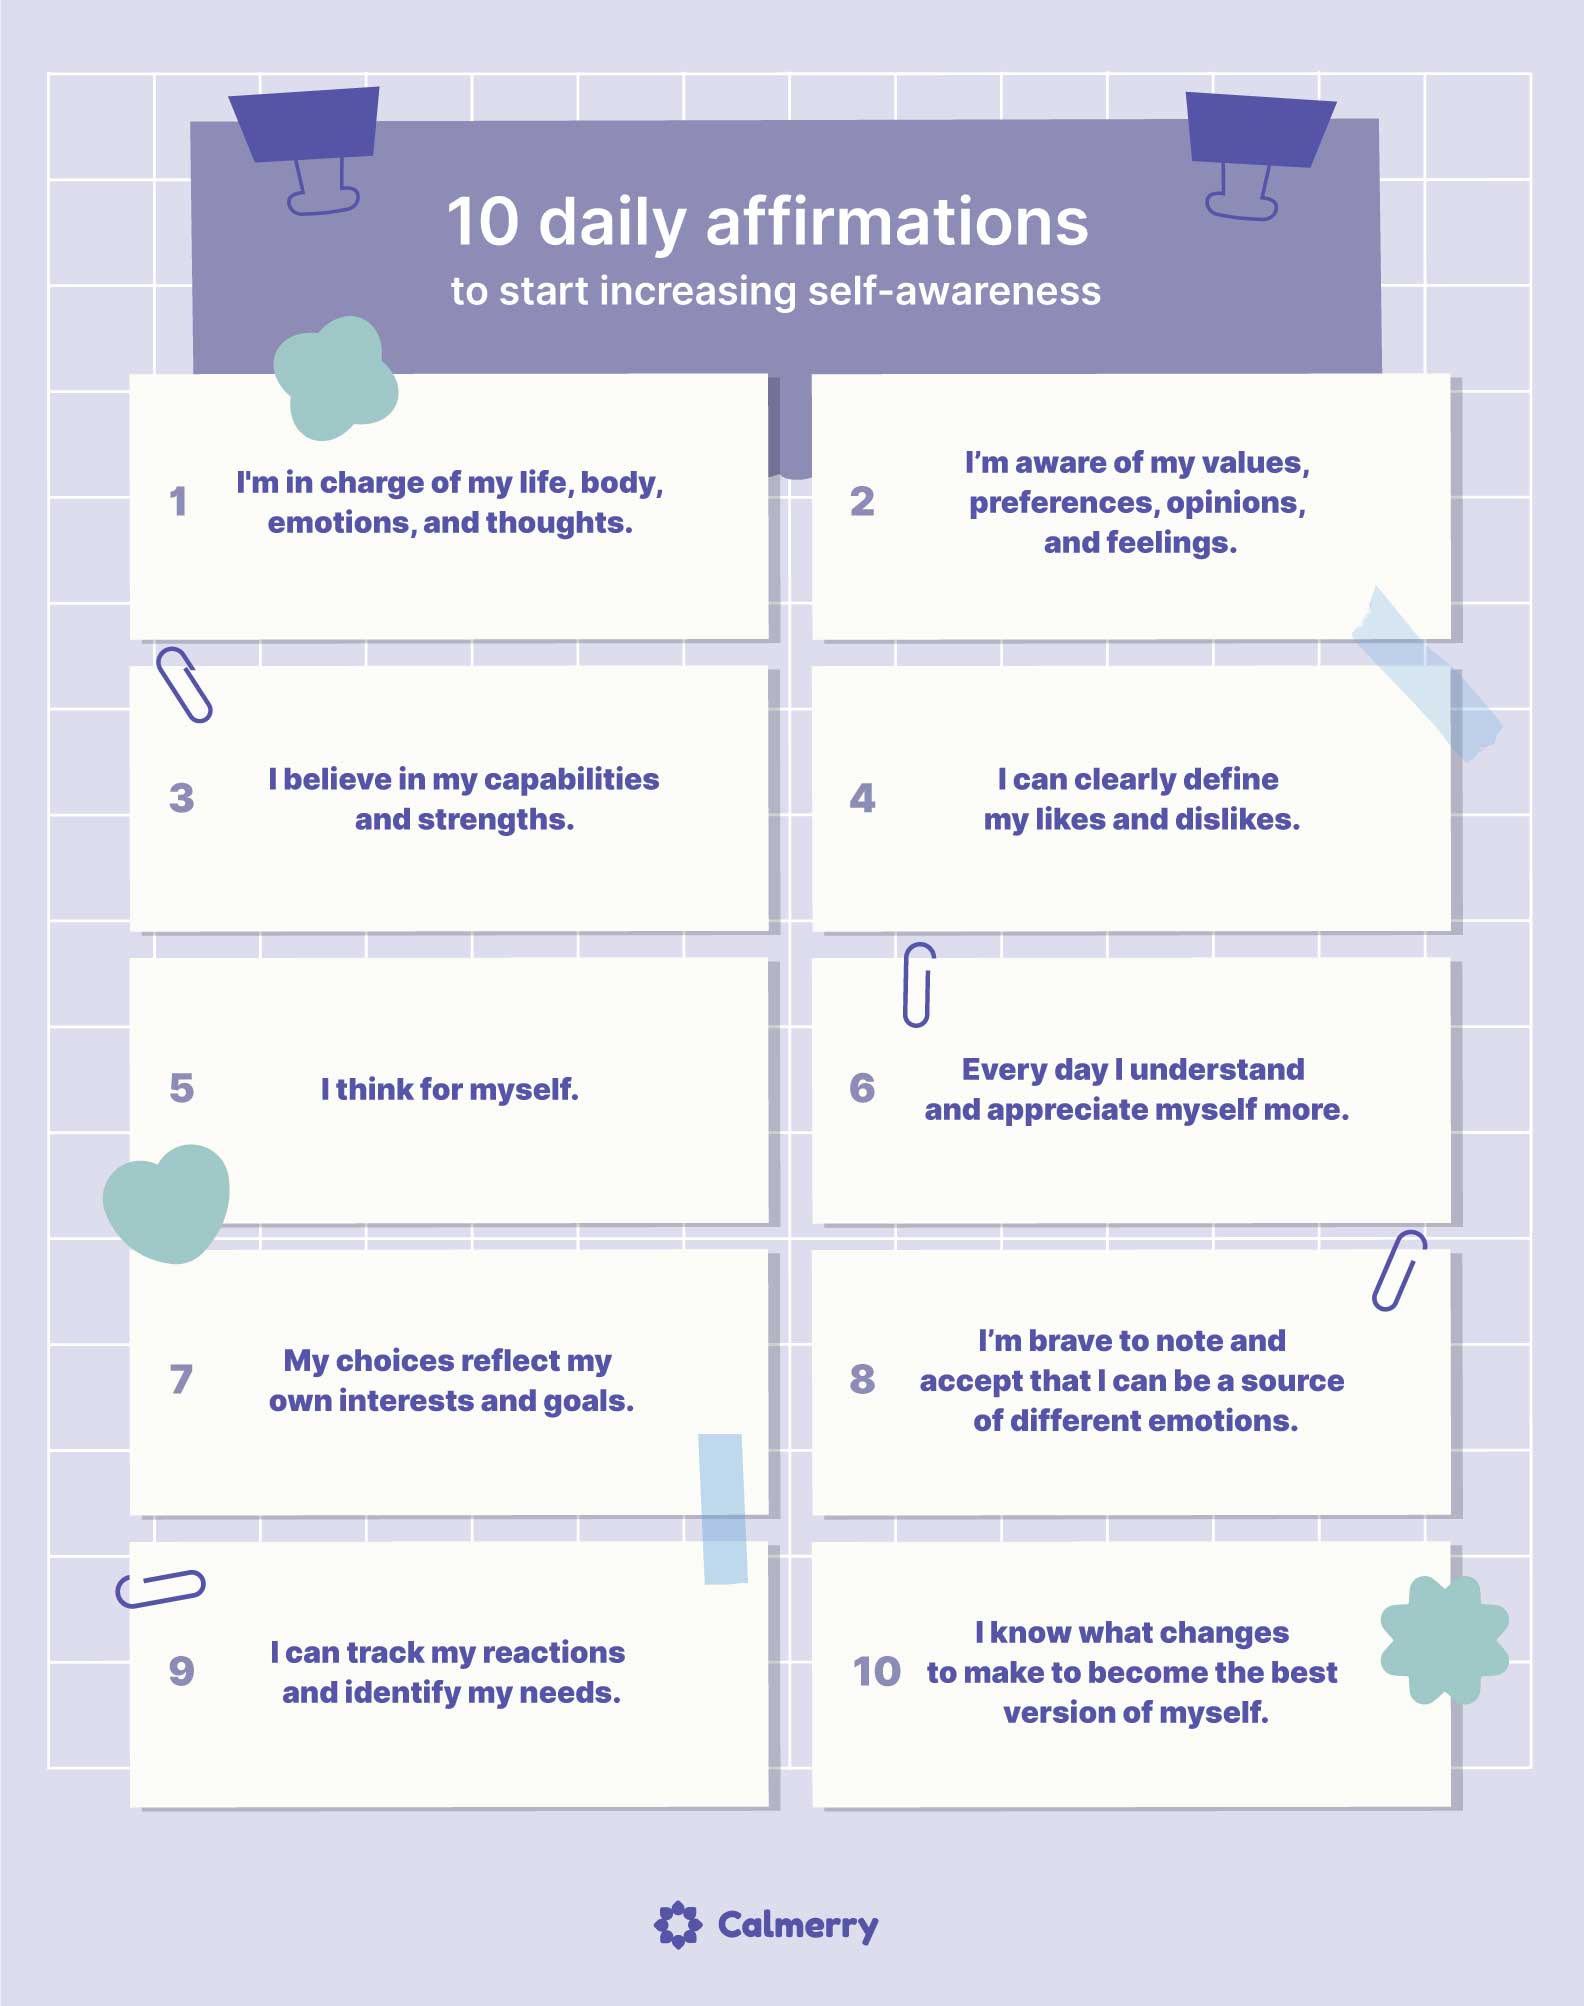 10 daily affirmations for you to start increasing self-awareness